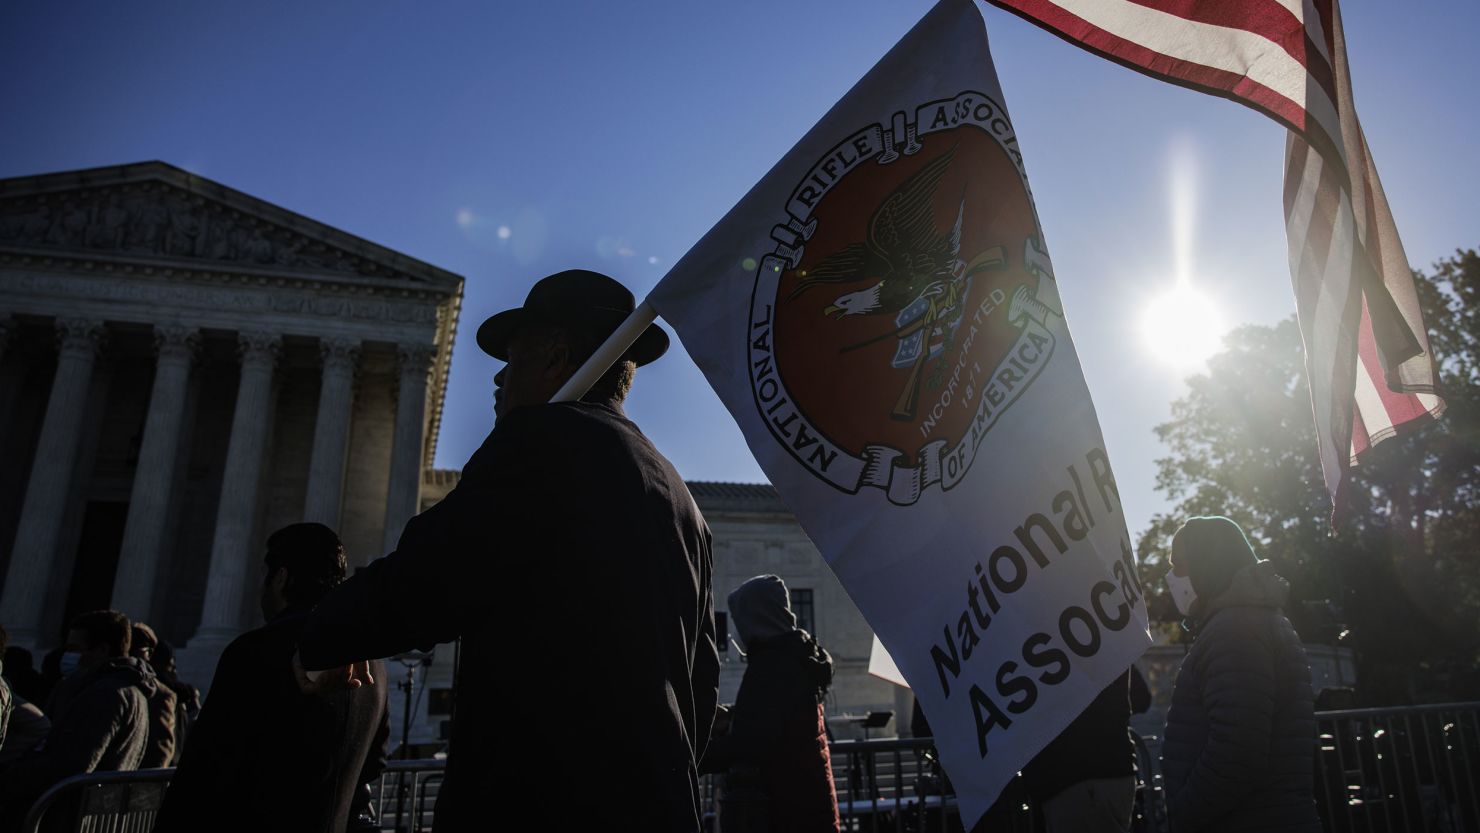 A demonstrator holds American and National Rifle Association flags outside the Supreme Court in November 2021.